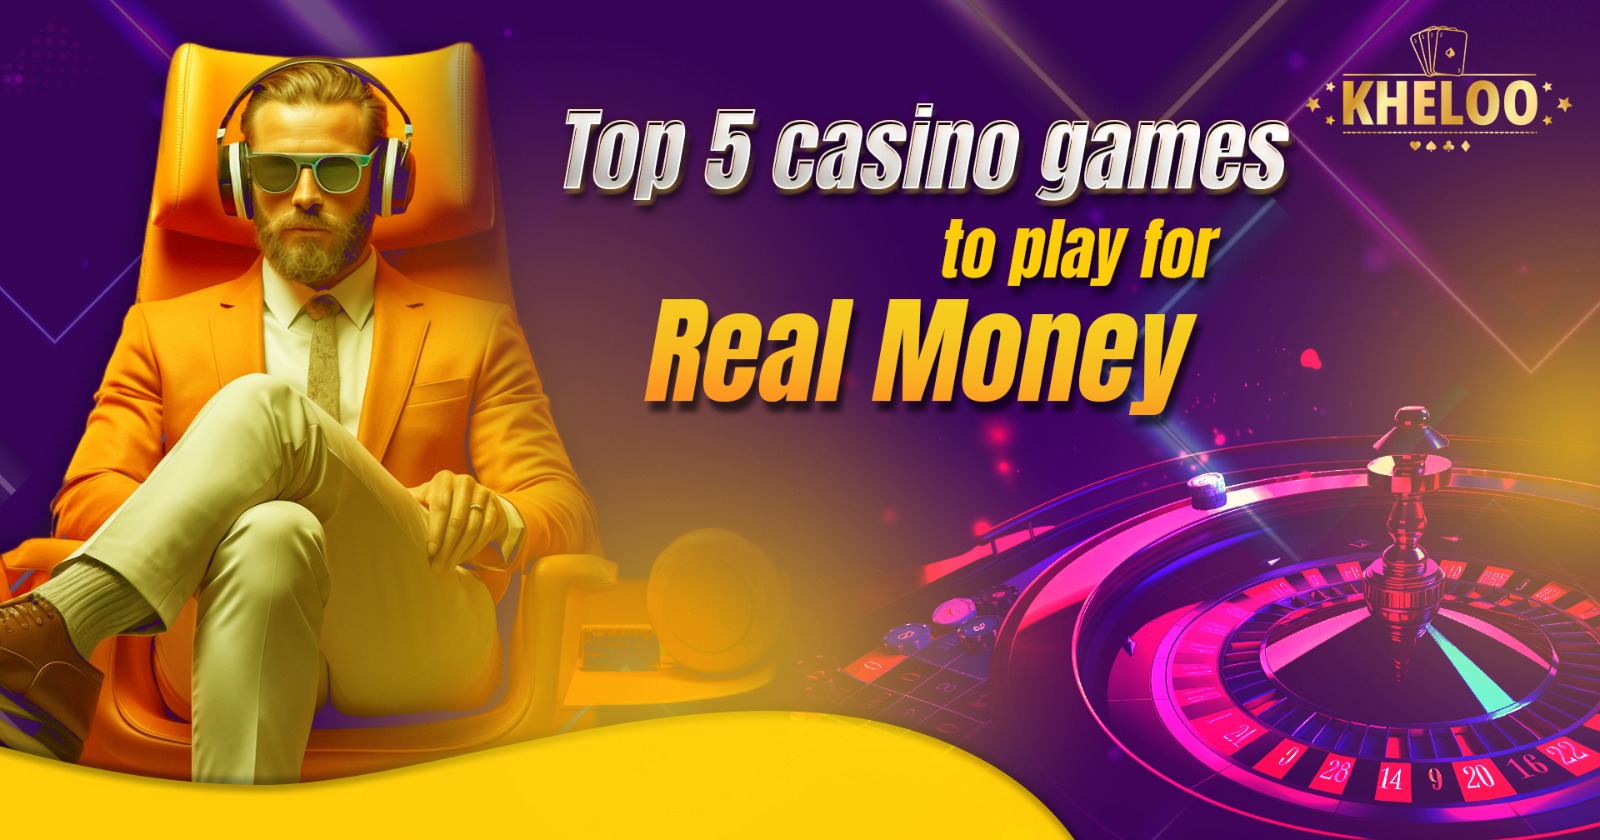 What Could Deciphering Online Casino Bonuses: A Guide Tailored for Indian Players Do To Make You Switch?